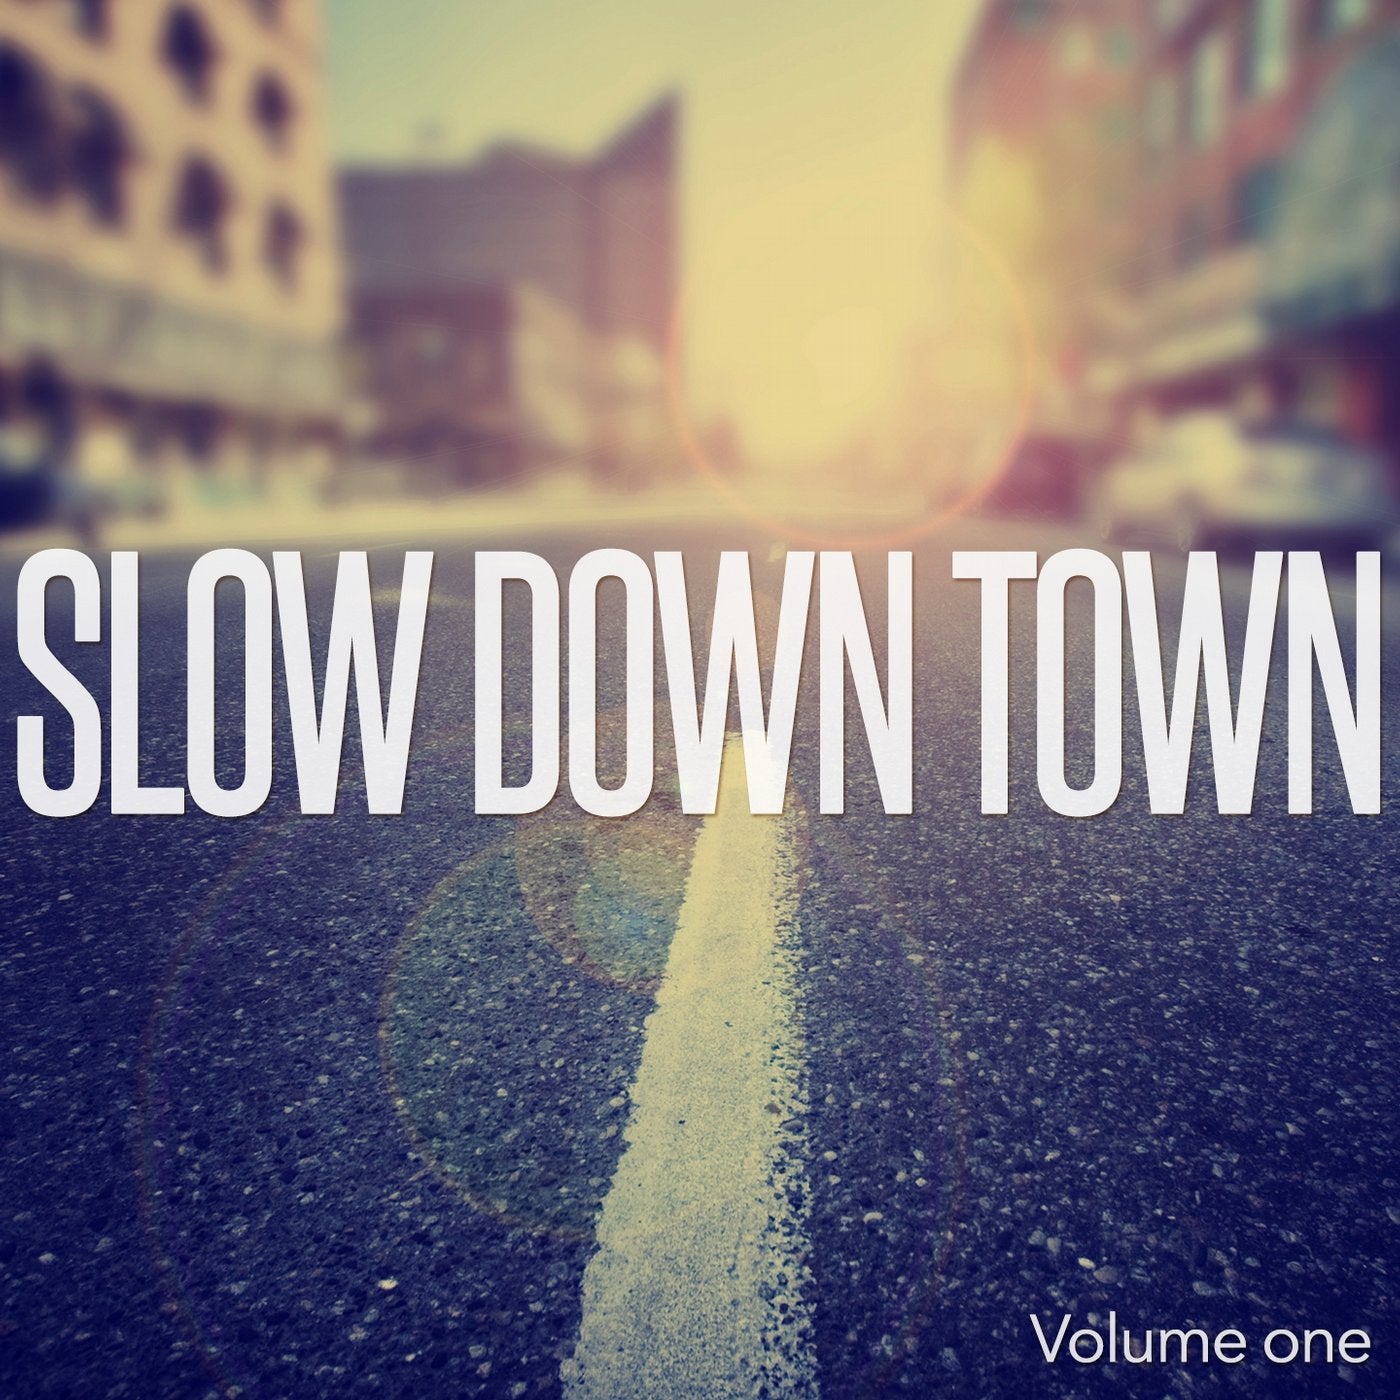 Slow Down Town, Vol. 1 (Cool Down & Relax Beats)